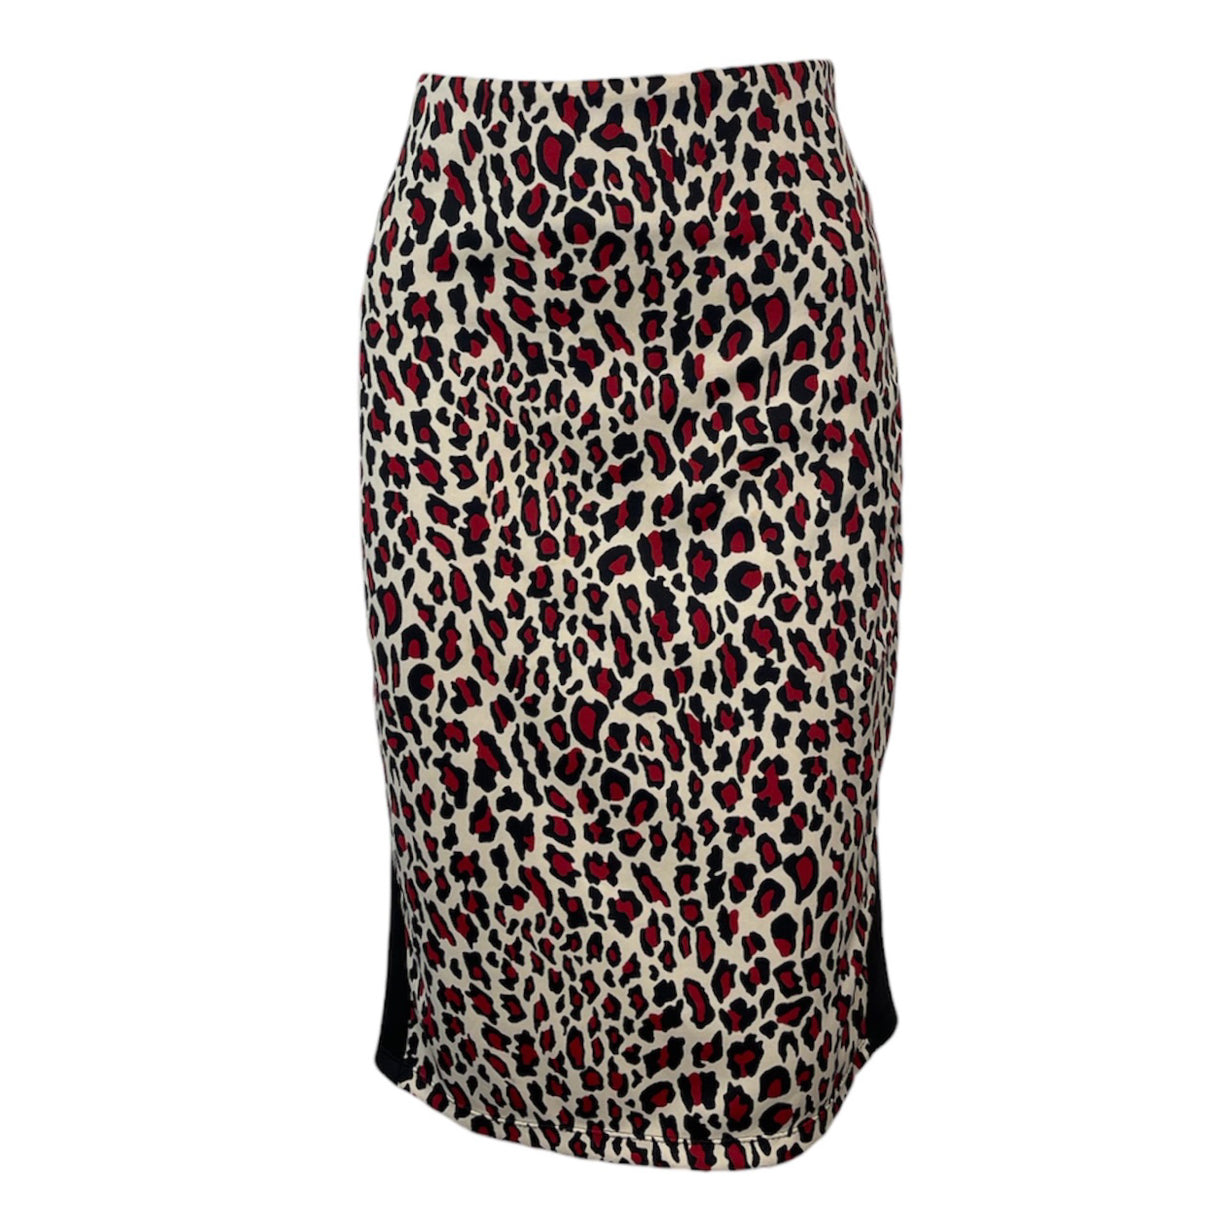 A Second Chance - Setre Skirt Xl Red Tiger Women - Delivery All Over Lebanon